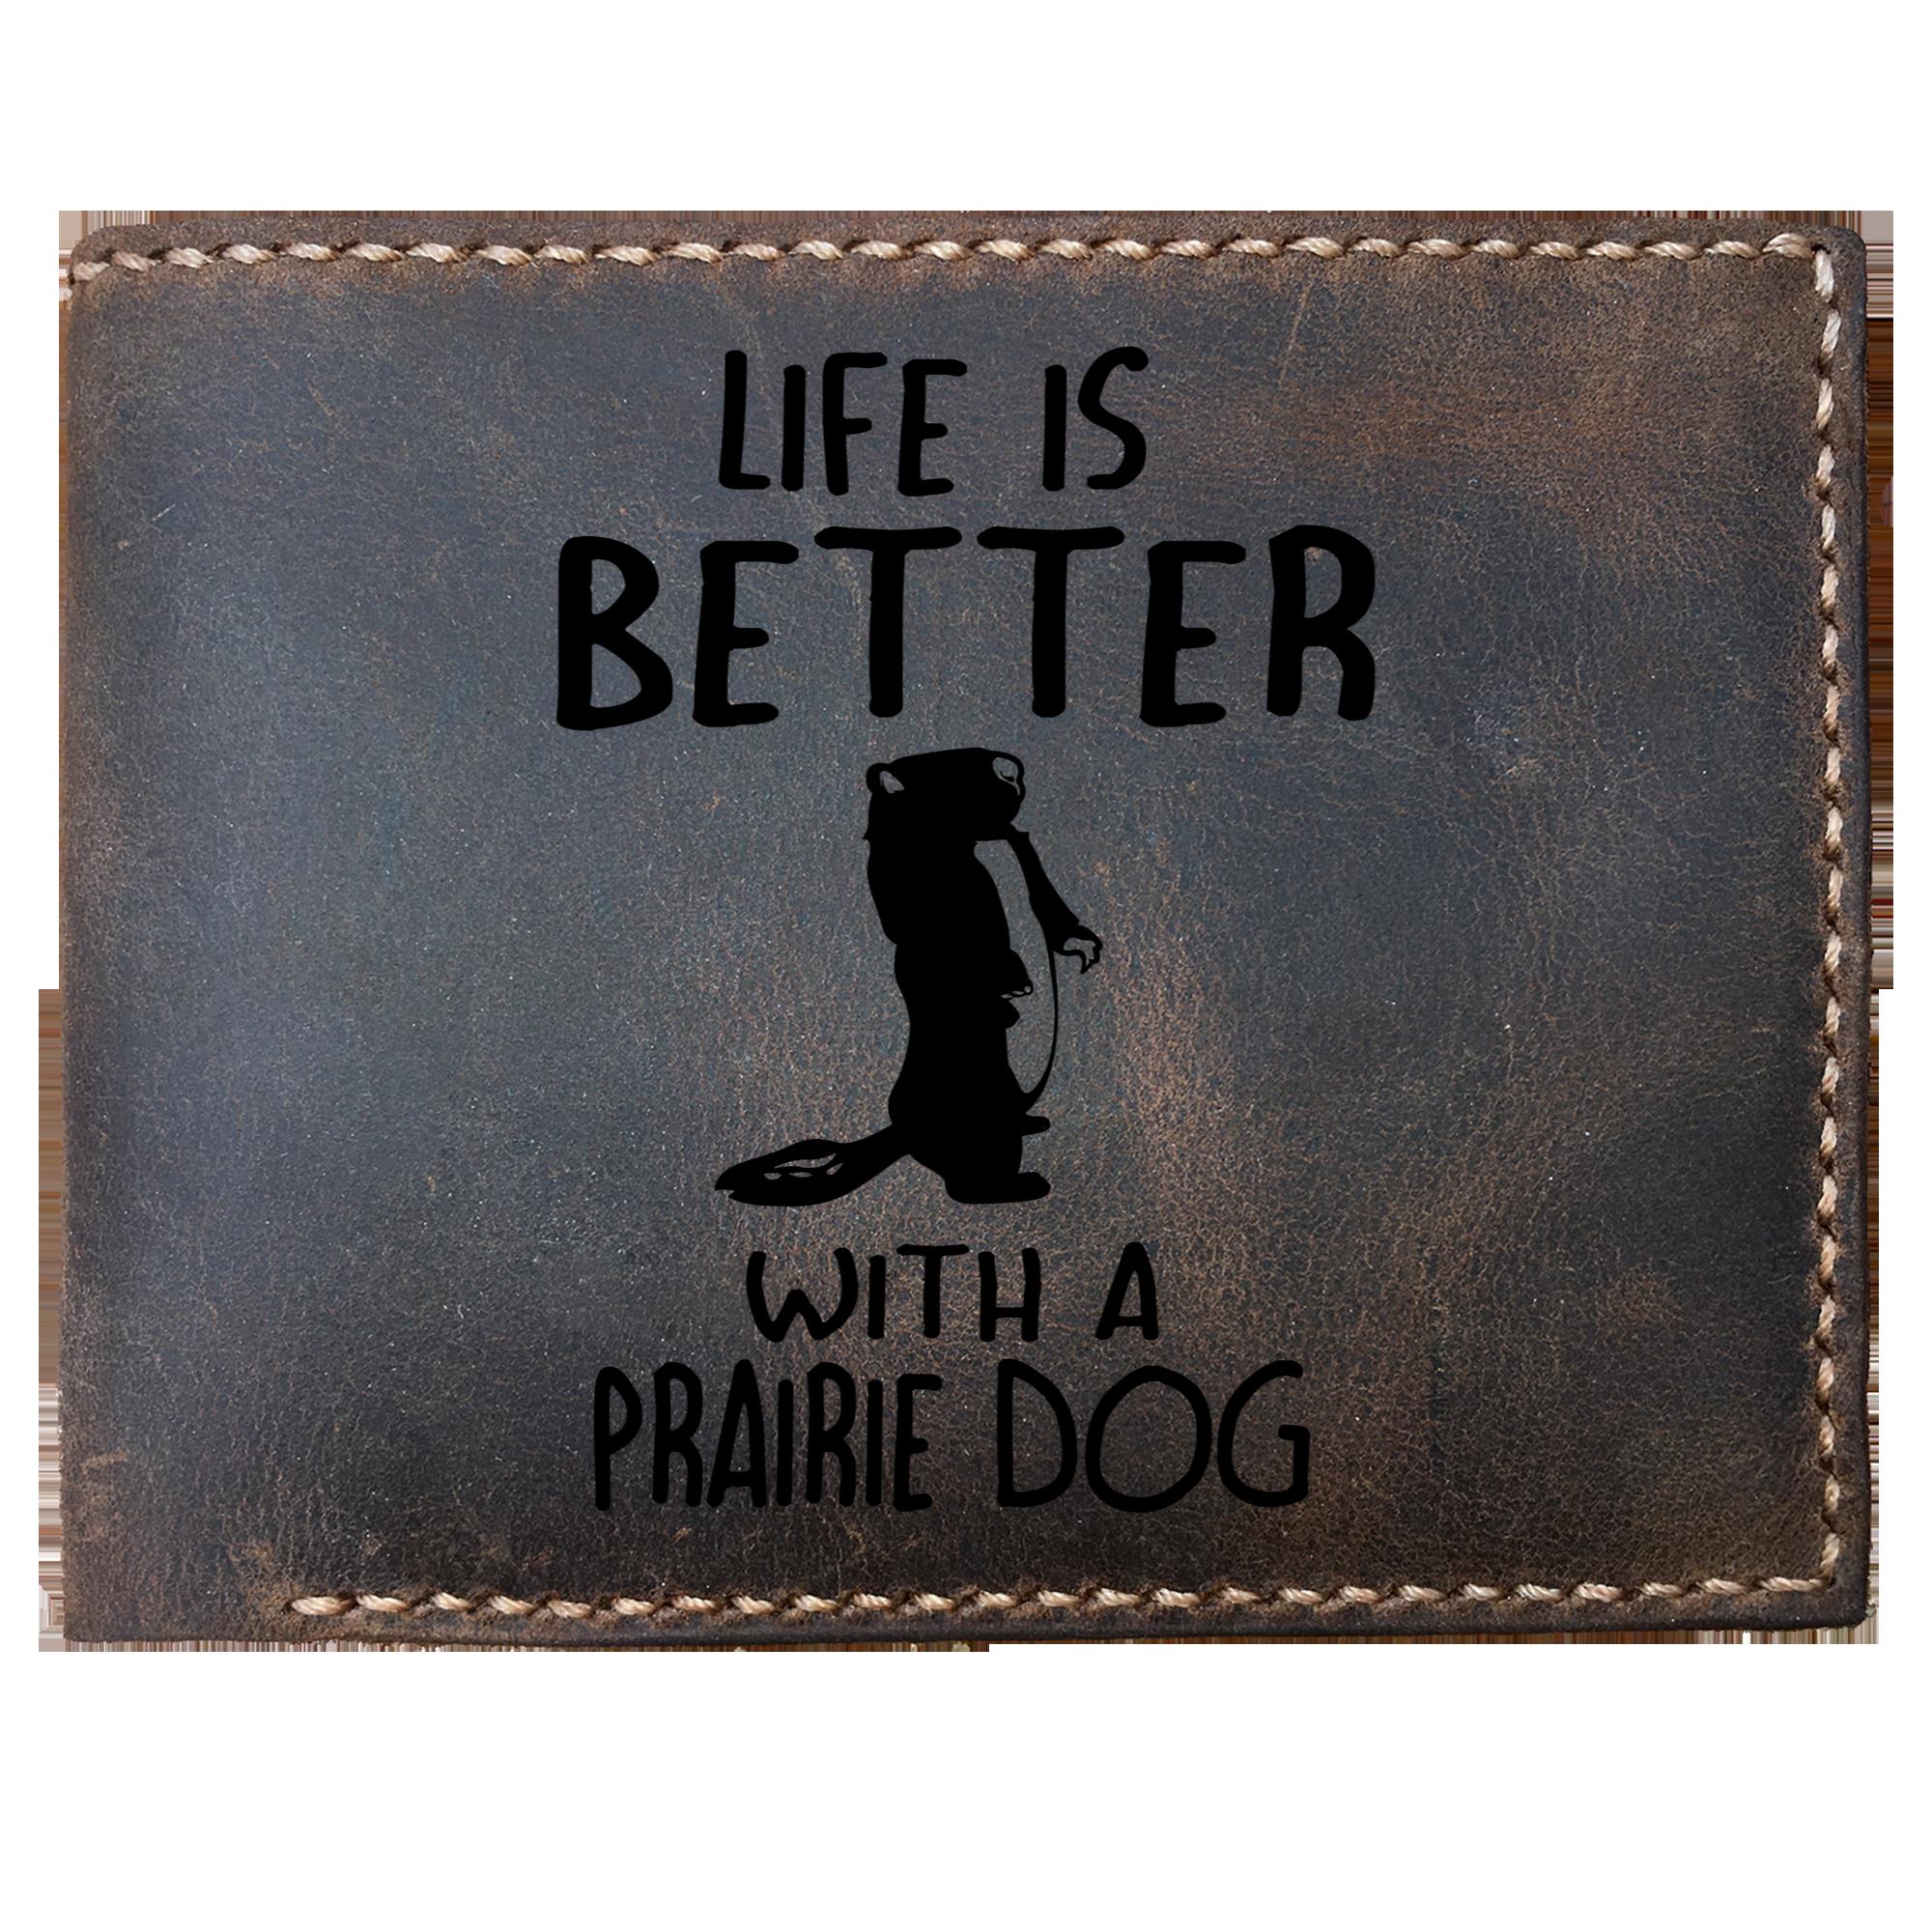 Skitongifts Funny Custom Laser Engraved Bifold Leather Wallet For Men, Life Is Better With A Prairie Dog